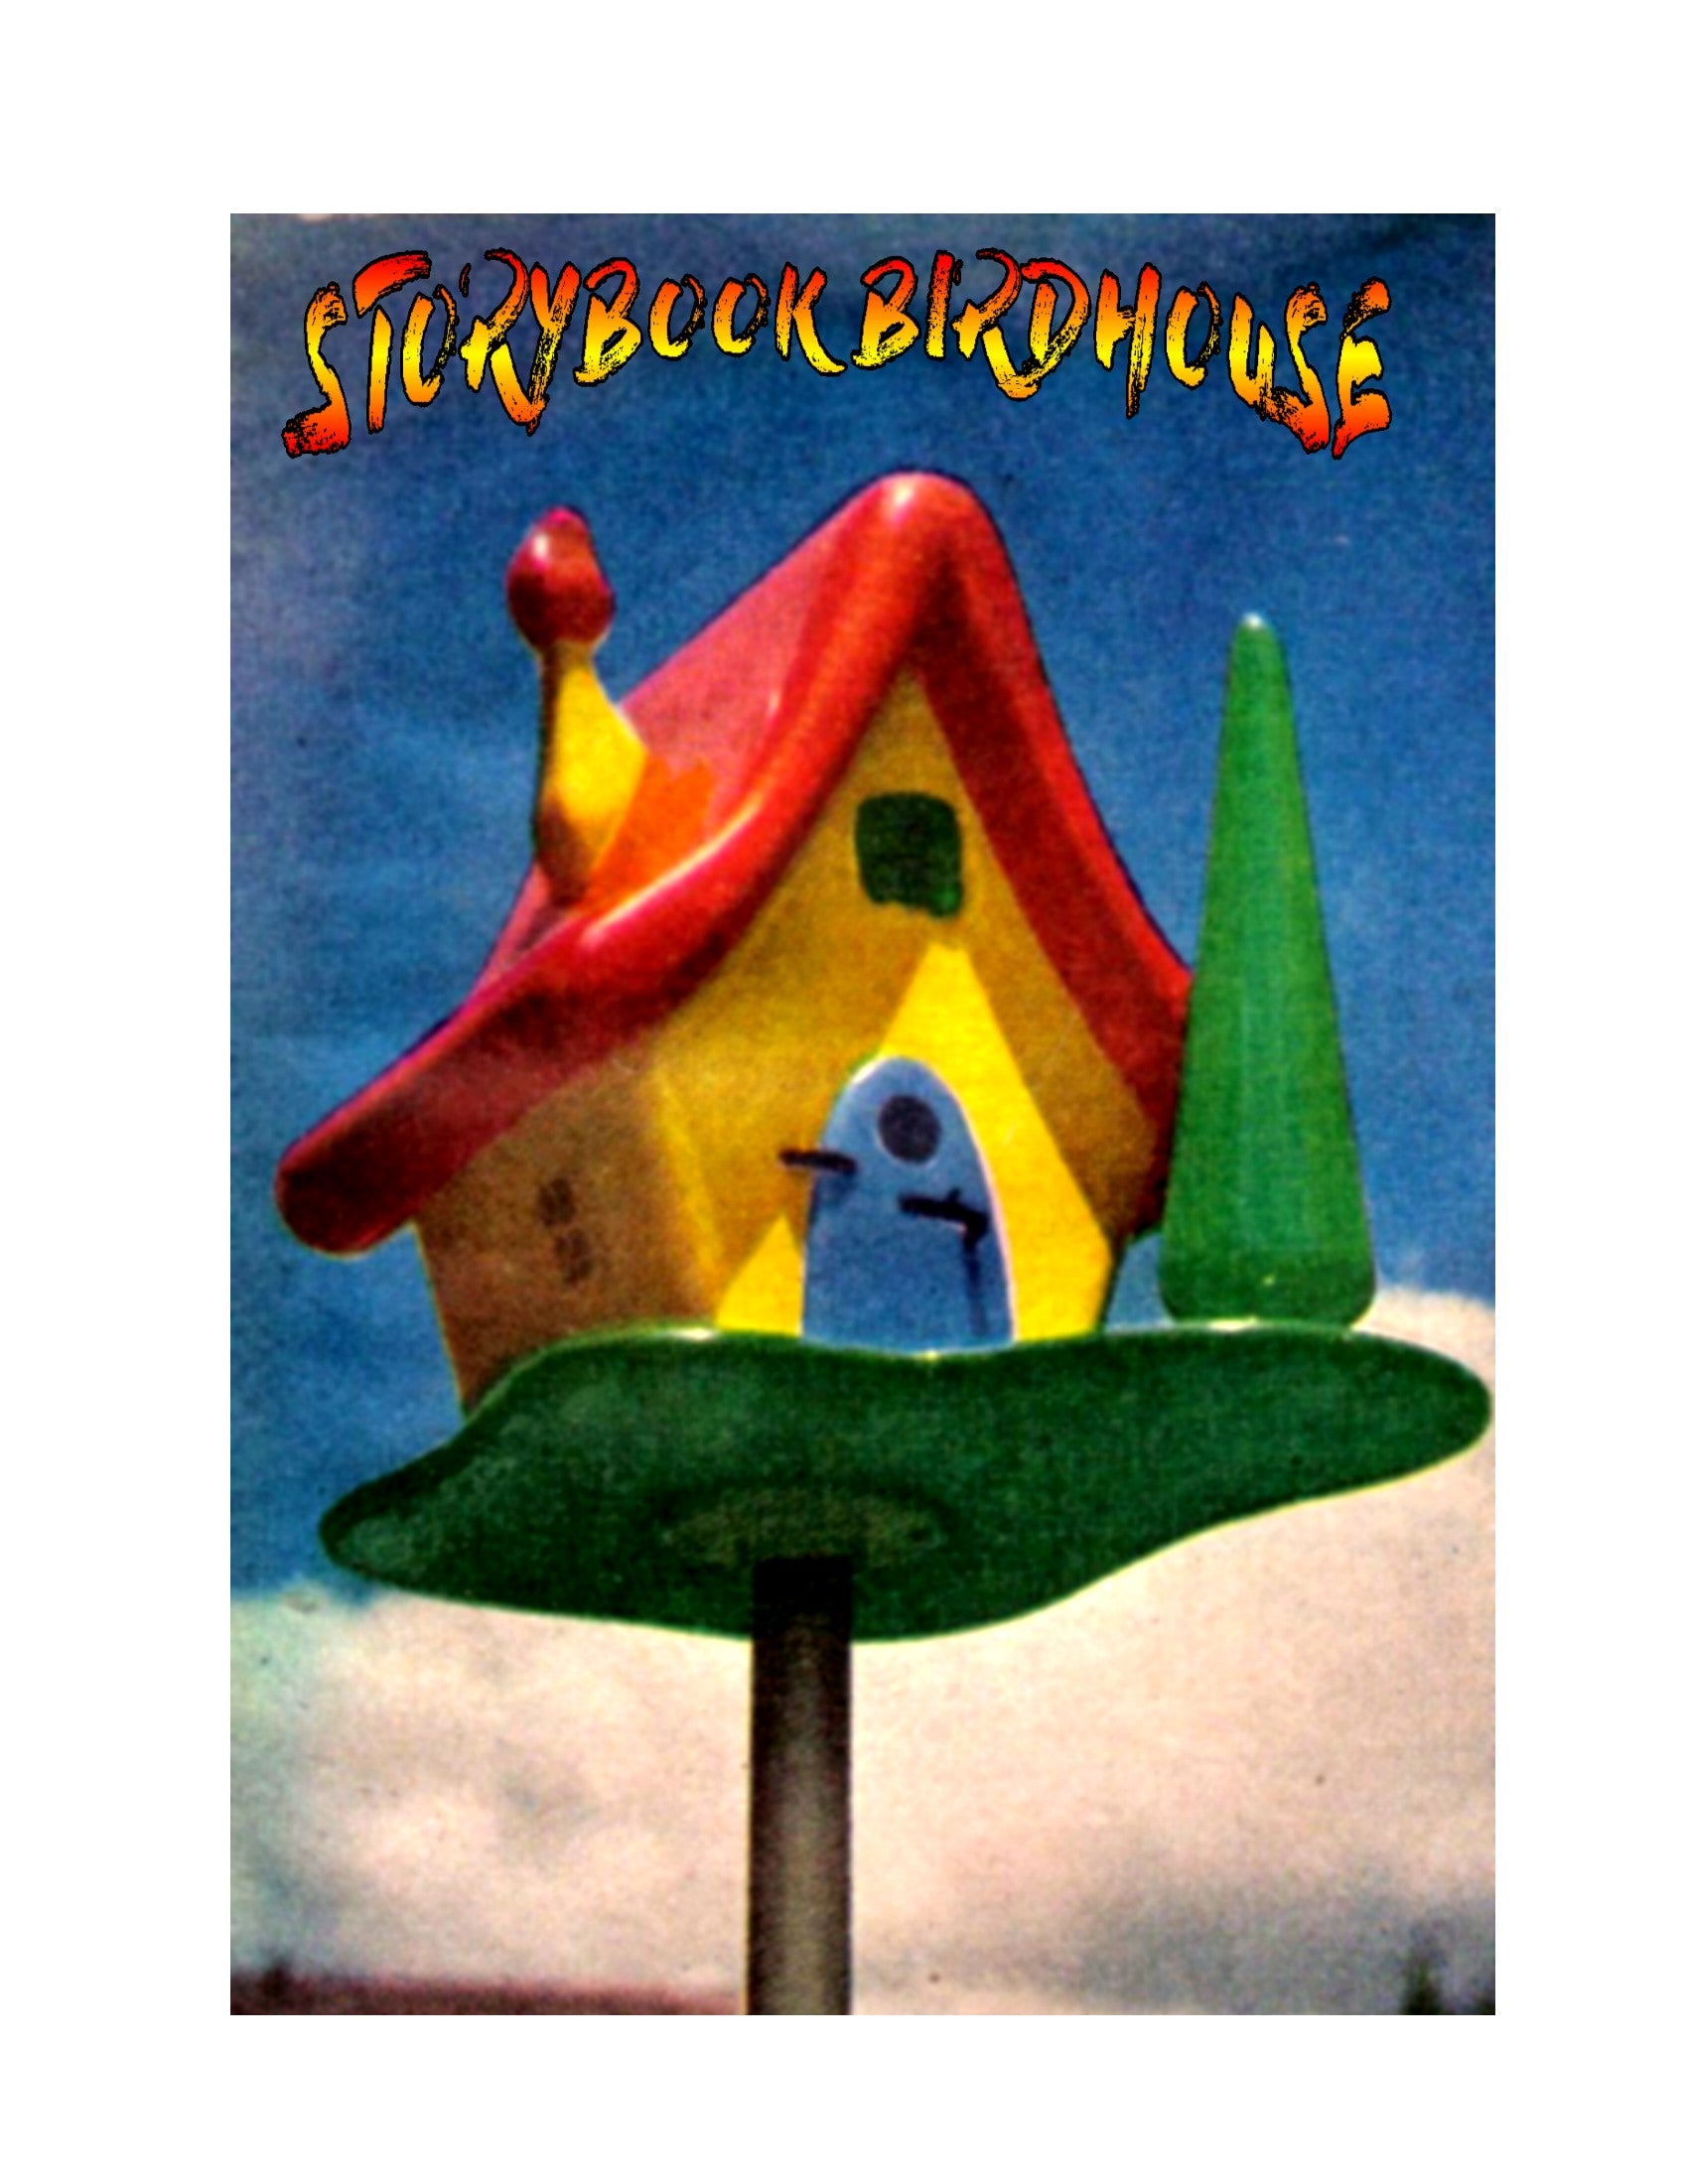 full size printed plans storybook birdhouse here’s a birdhouse that's different,